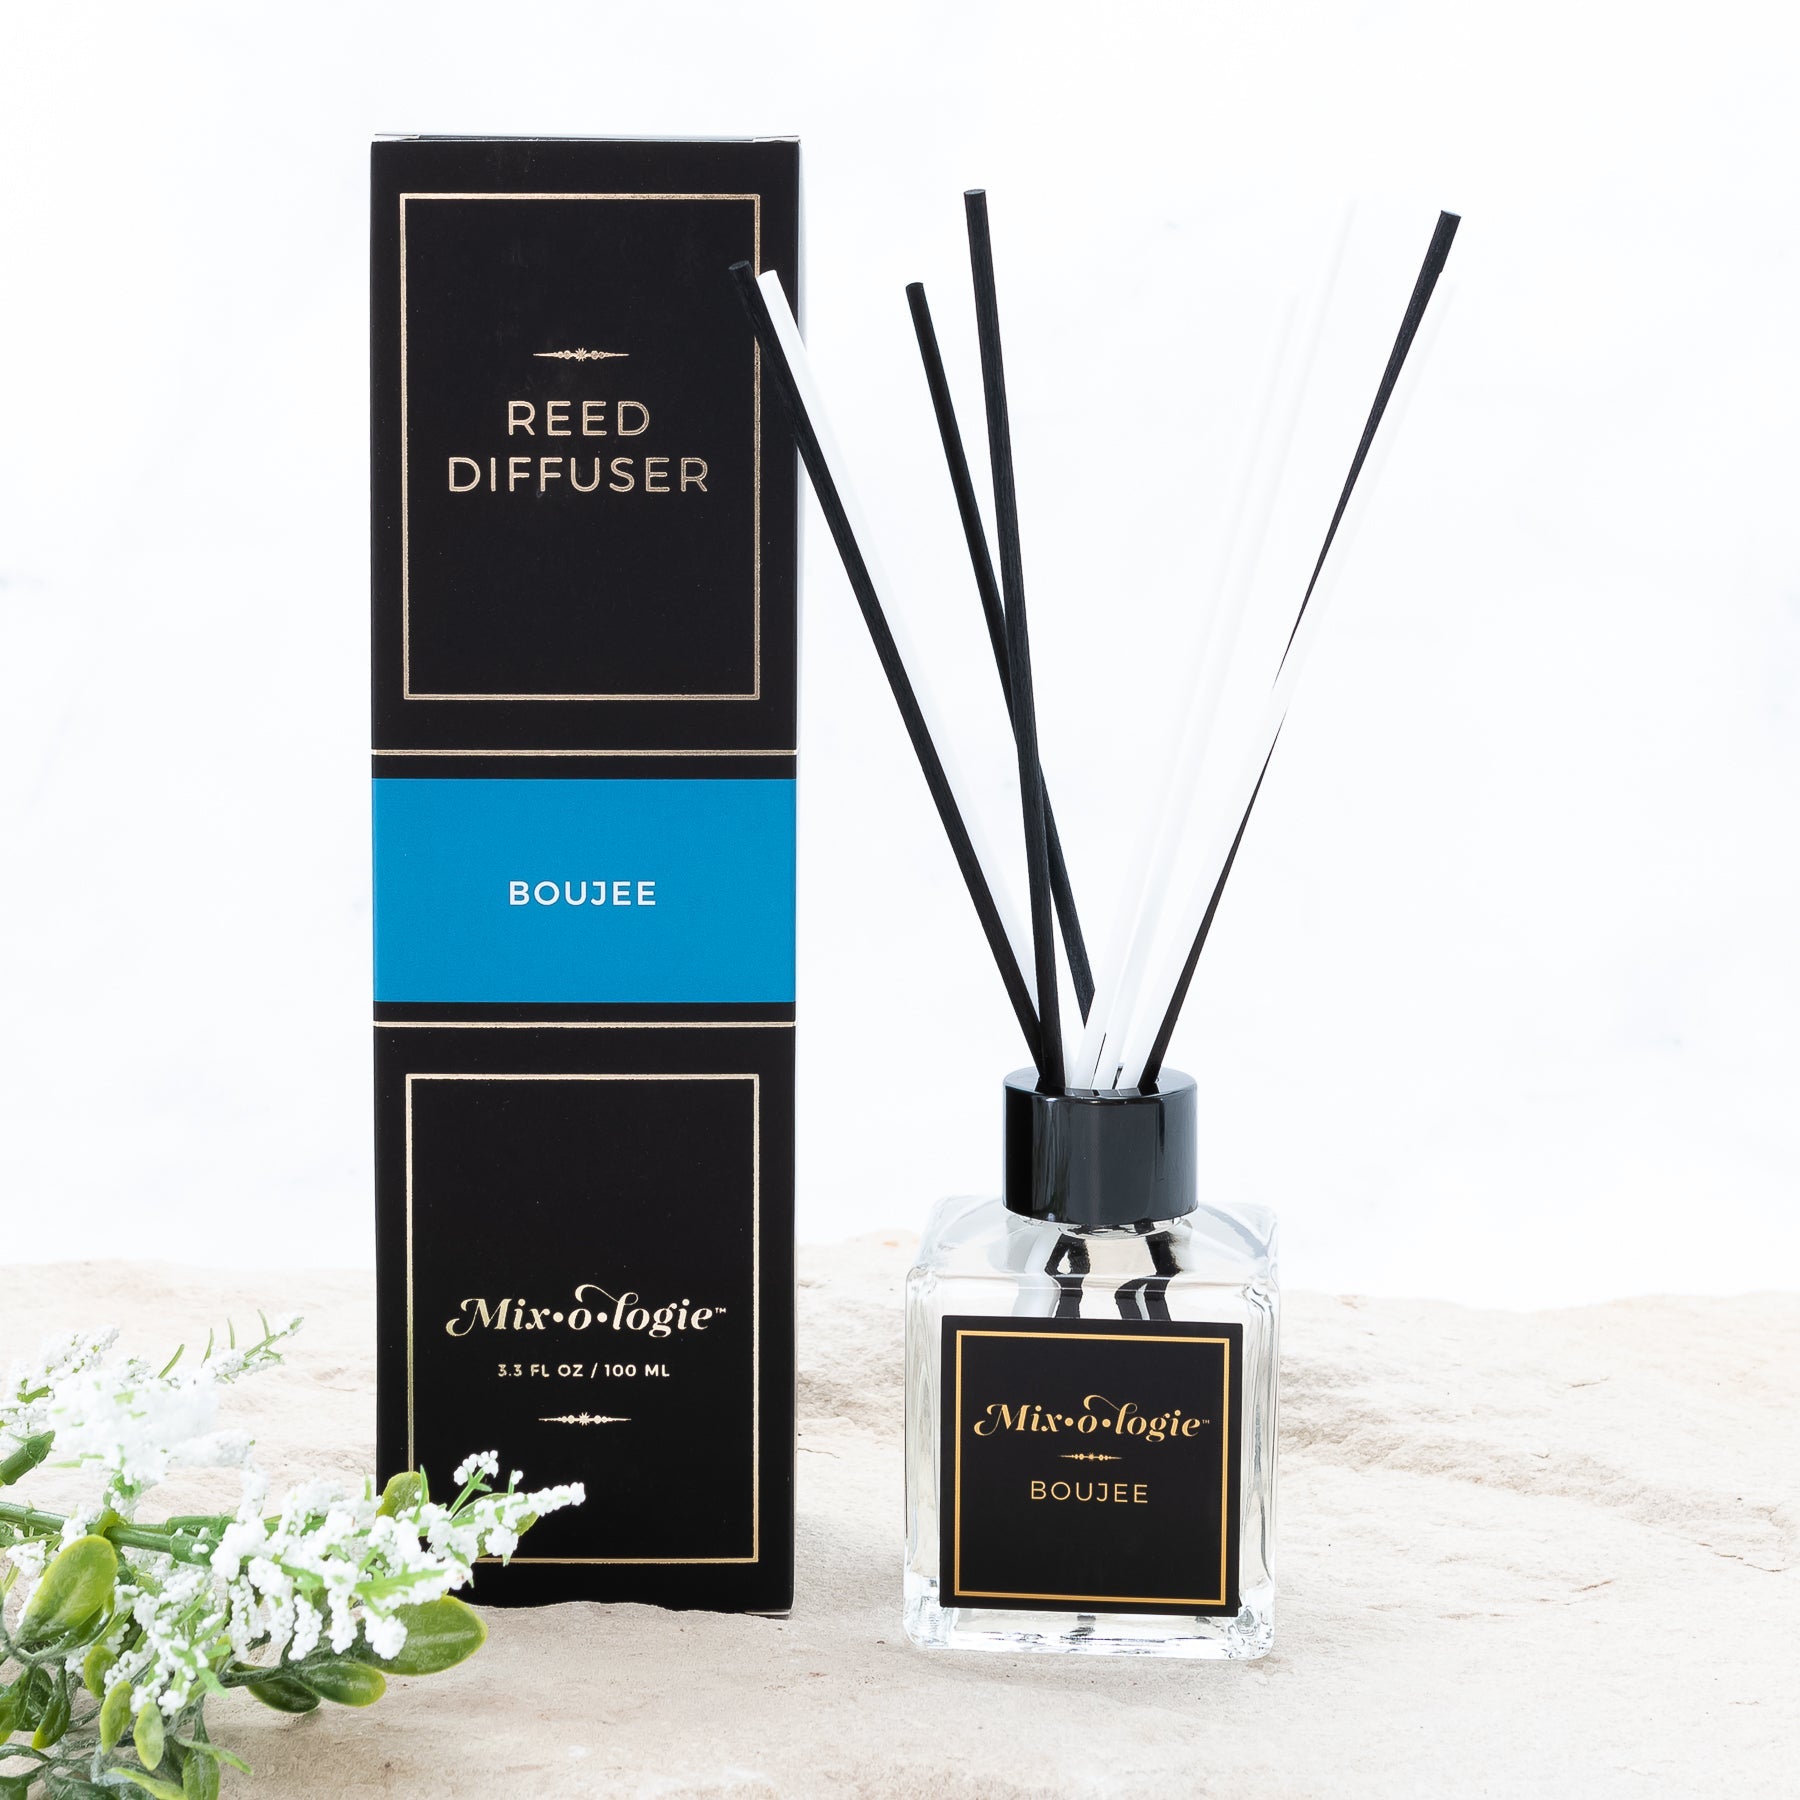 Boujee Reed Diffuser is a clear square glass container with black label that says Mixologie – Boujee. Has a black top and 4 white & 4 black reed sticks coming out of top, is 3.3 fl oz or 100 mL of clear scented liquid. Black rectangle package box with blue label. Box and diffuser are pictured with sand and greenery with white flowers.